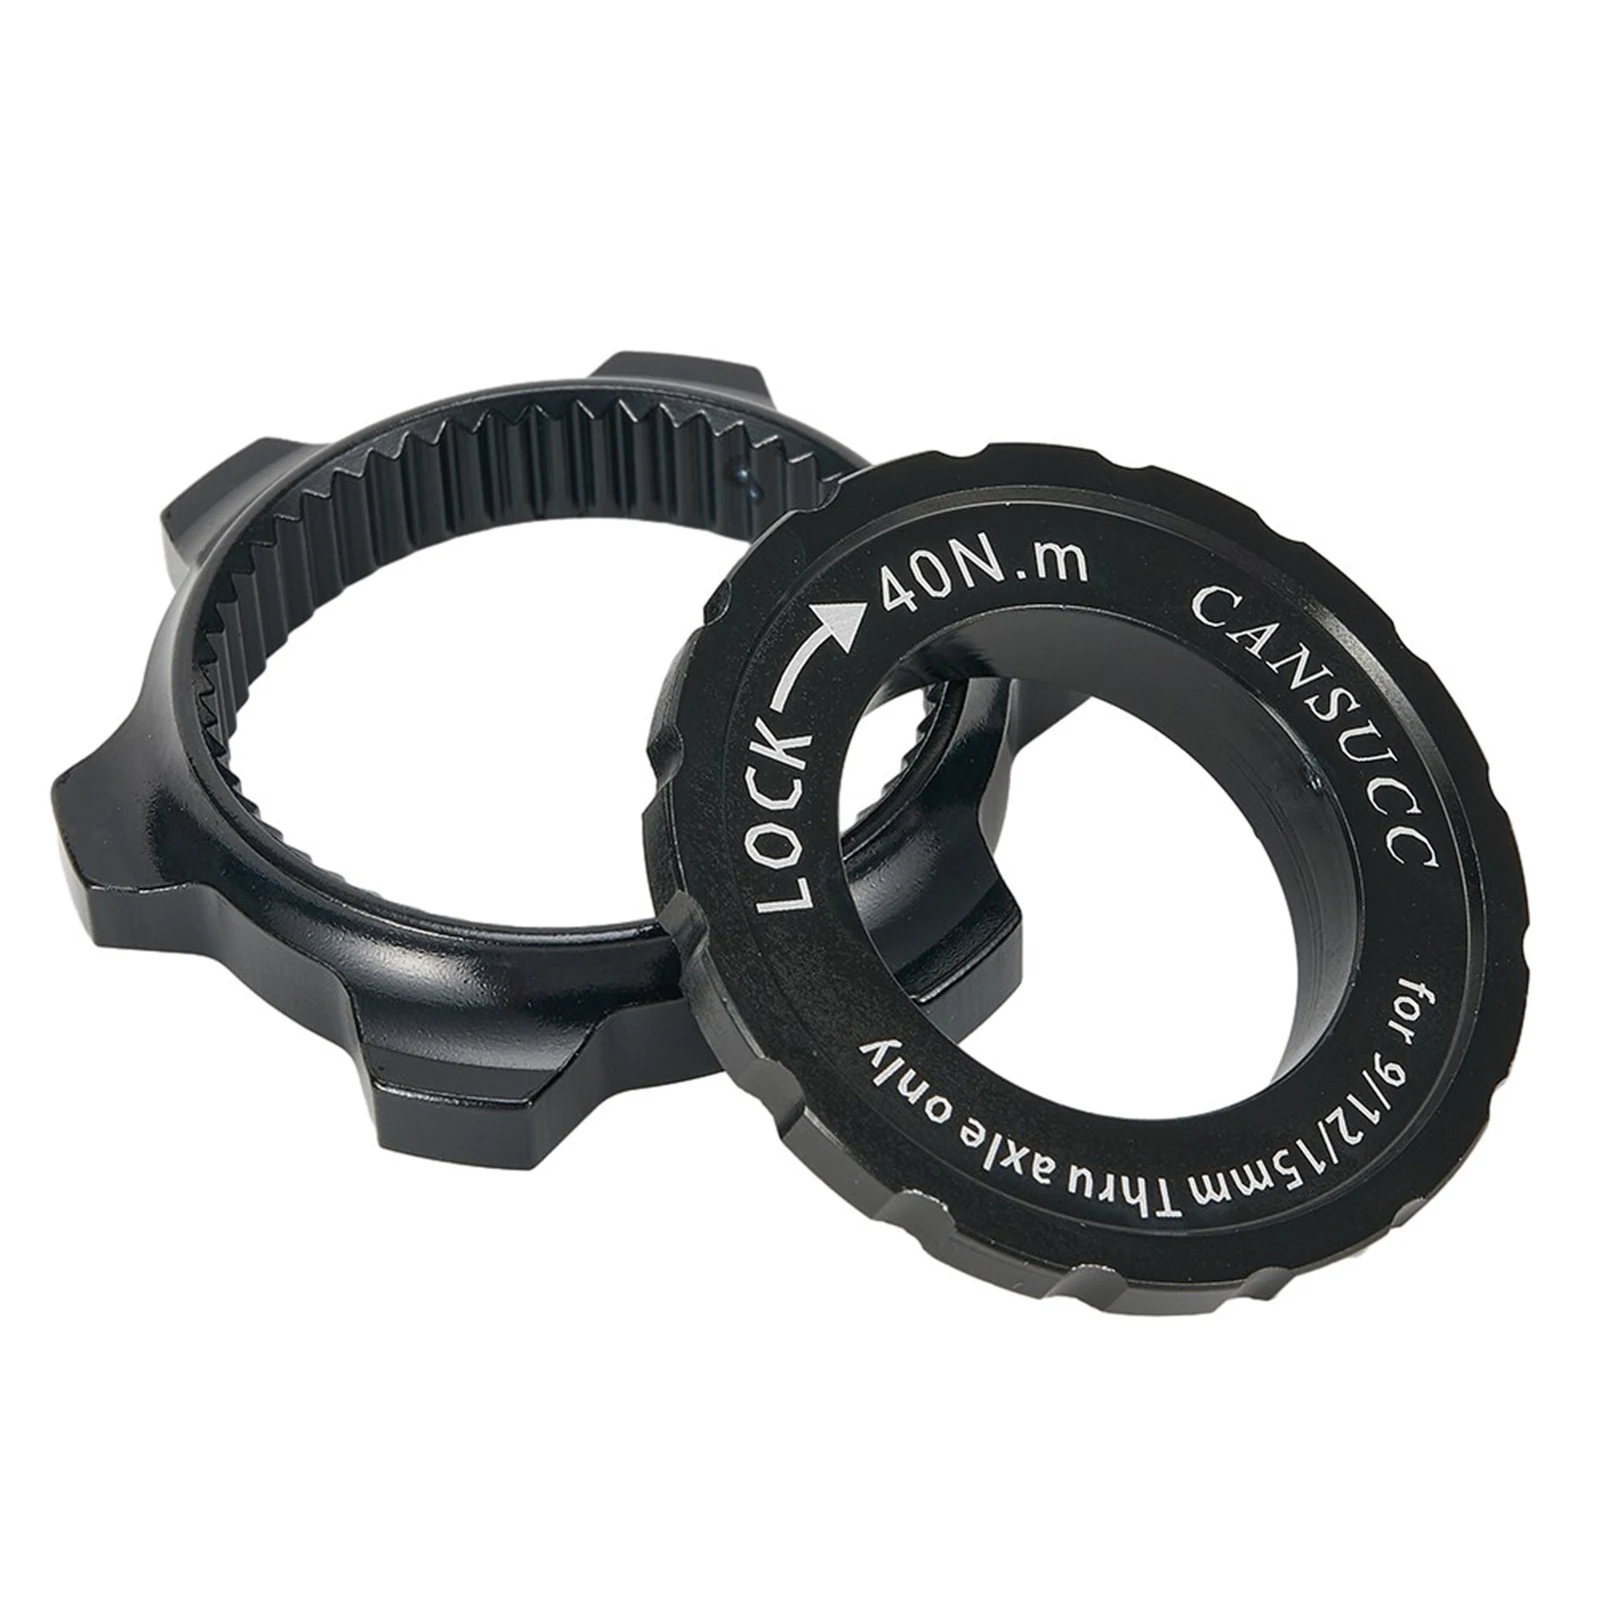 

Centre Lock Disc Adapter Disc Brake Rotor Disc To Six-pin Bicycles Center Lock Bike Hub CNC Technology To 6-Bolt Aluminum Alloy